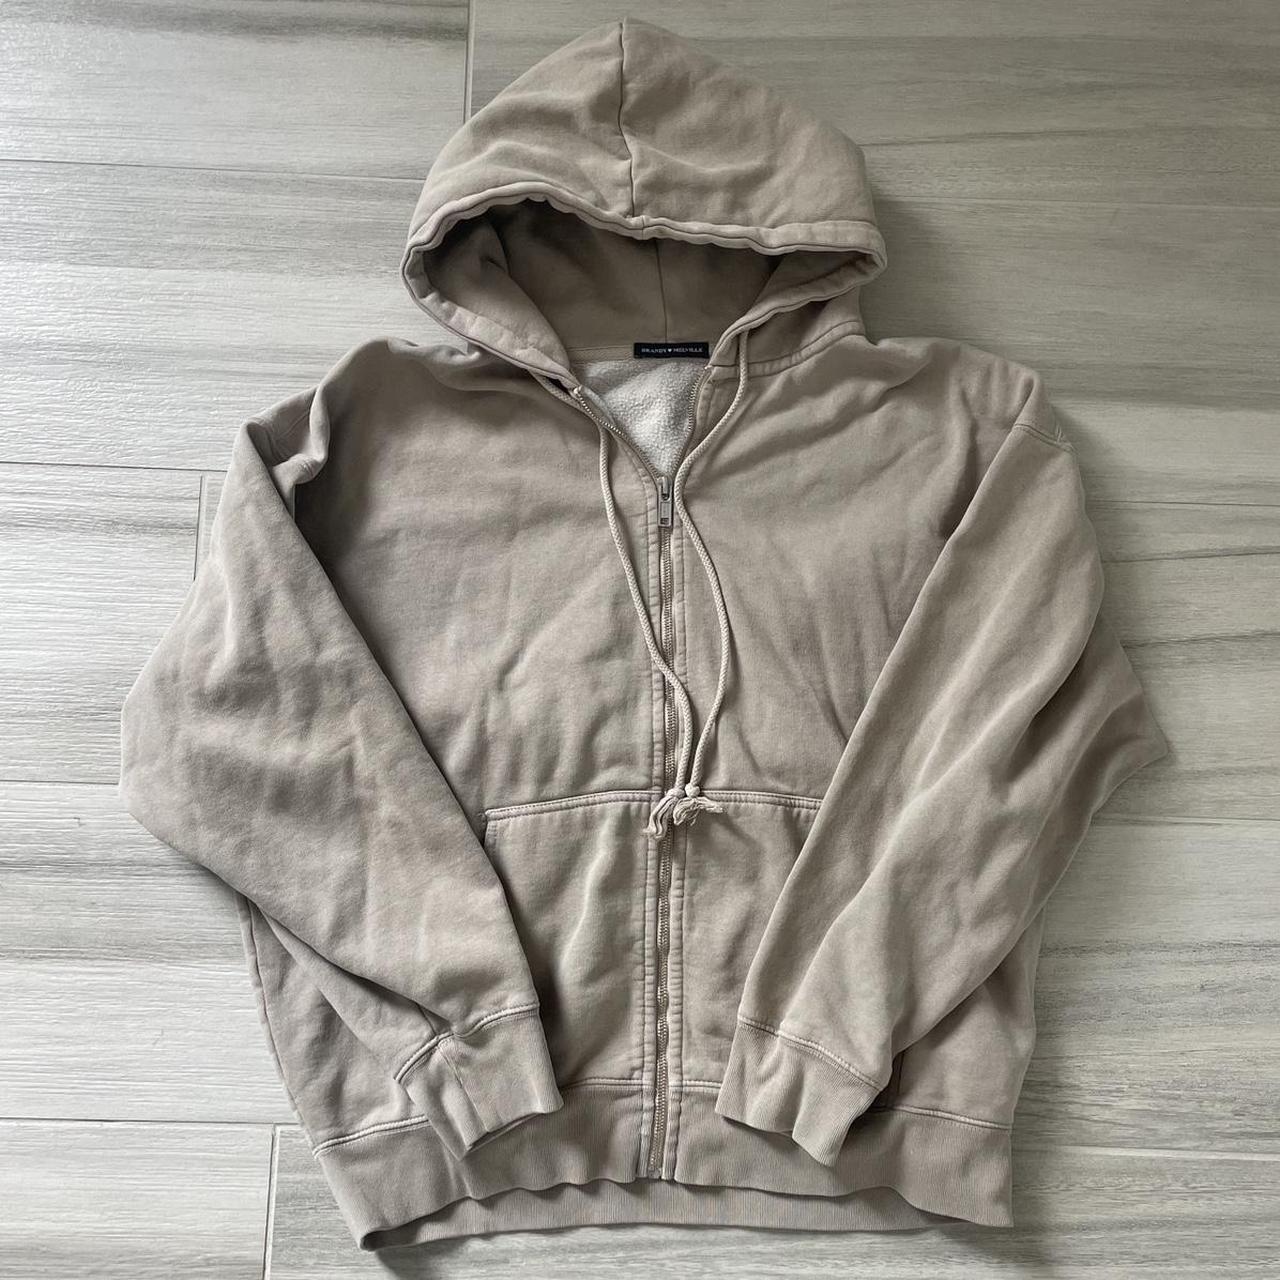 i bought a brandy melville christy hoodie from depop and it came with a  bleach stain😭 how do i get rid of it? (the seller said there were some  flaws but i